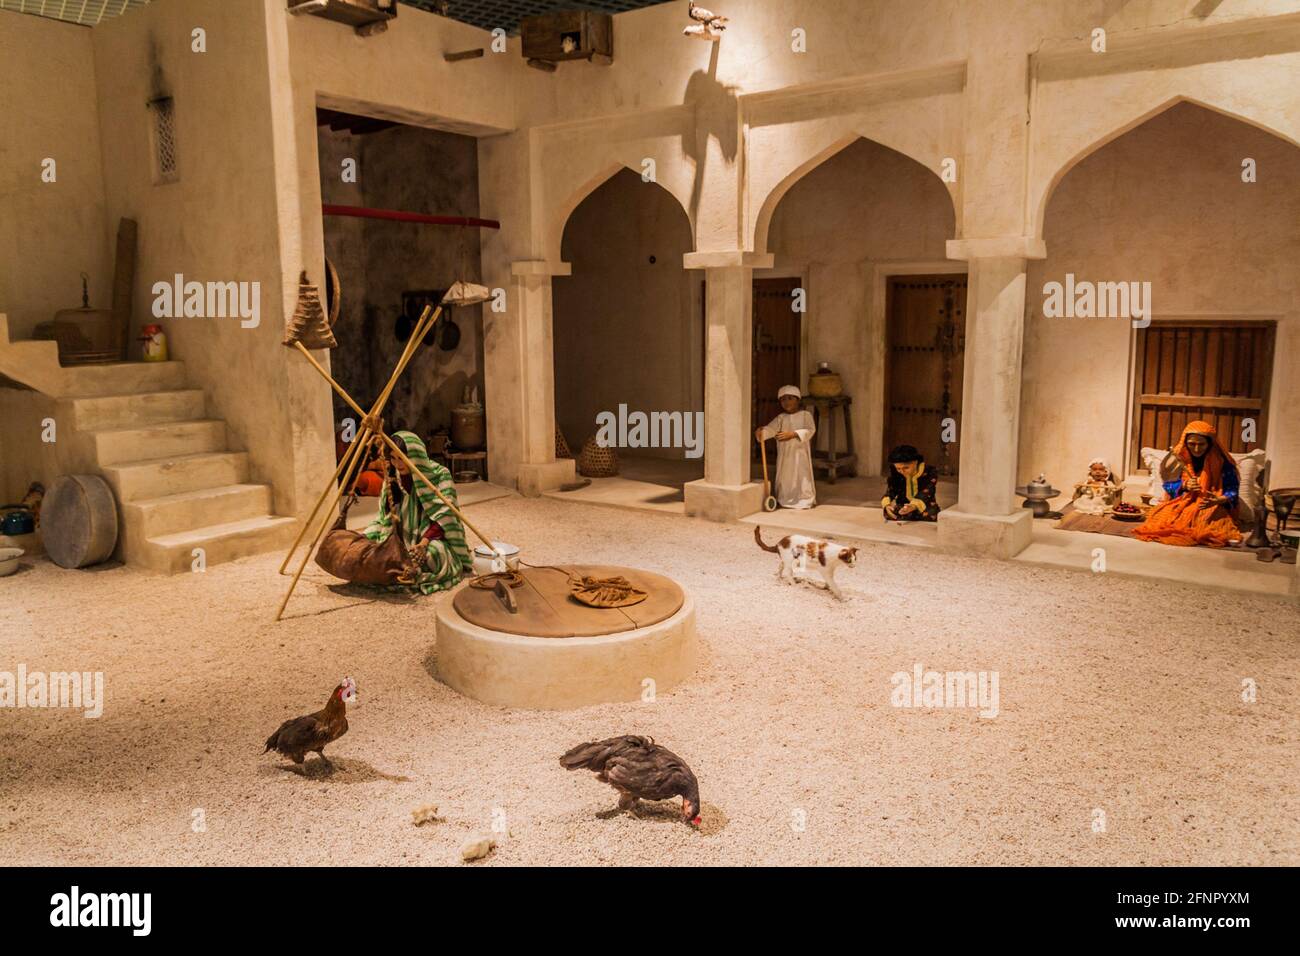 MANAMA, BAHRAIN - MARCH 15, 2017: Interior of Bahrain National Museum. Exhibit shows a traditional life. Stock Photo